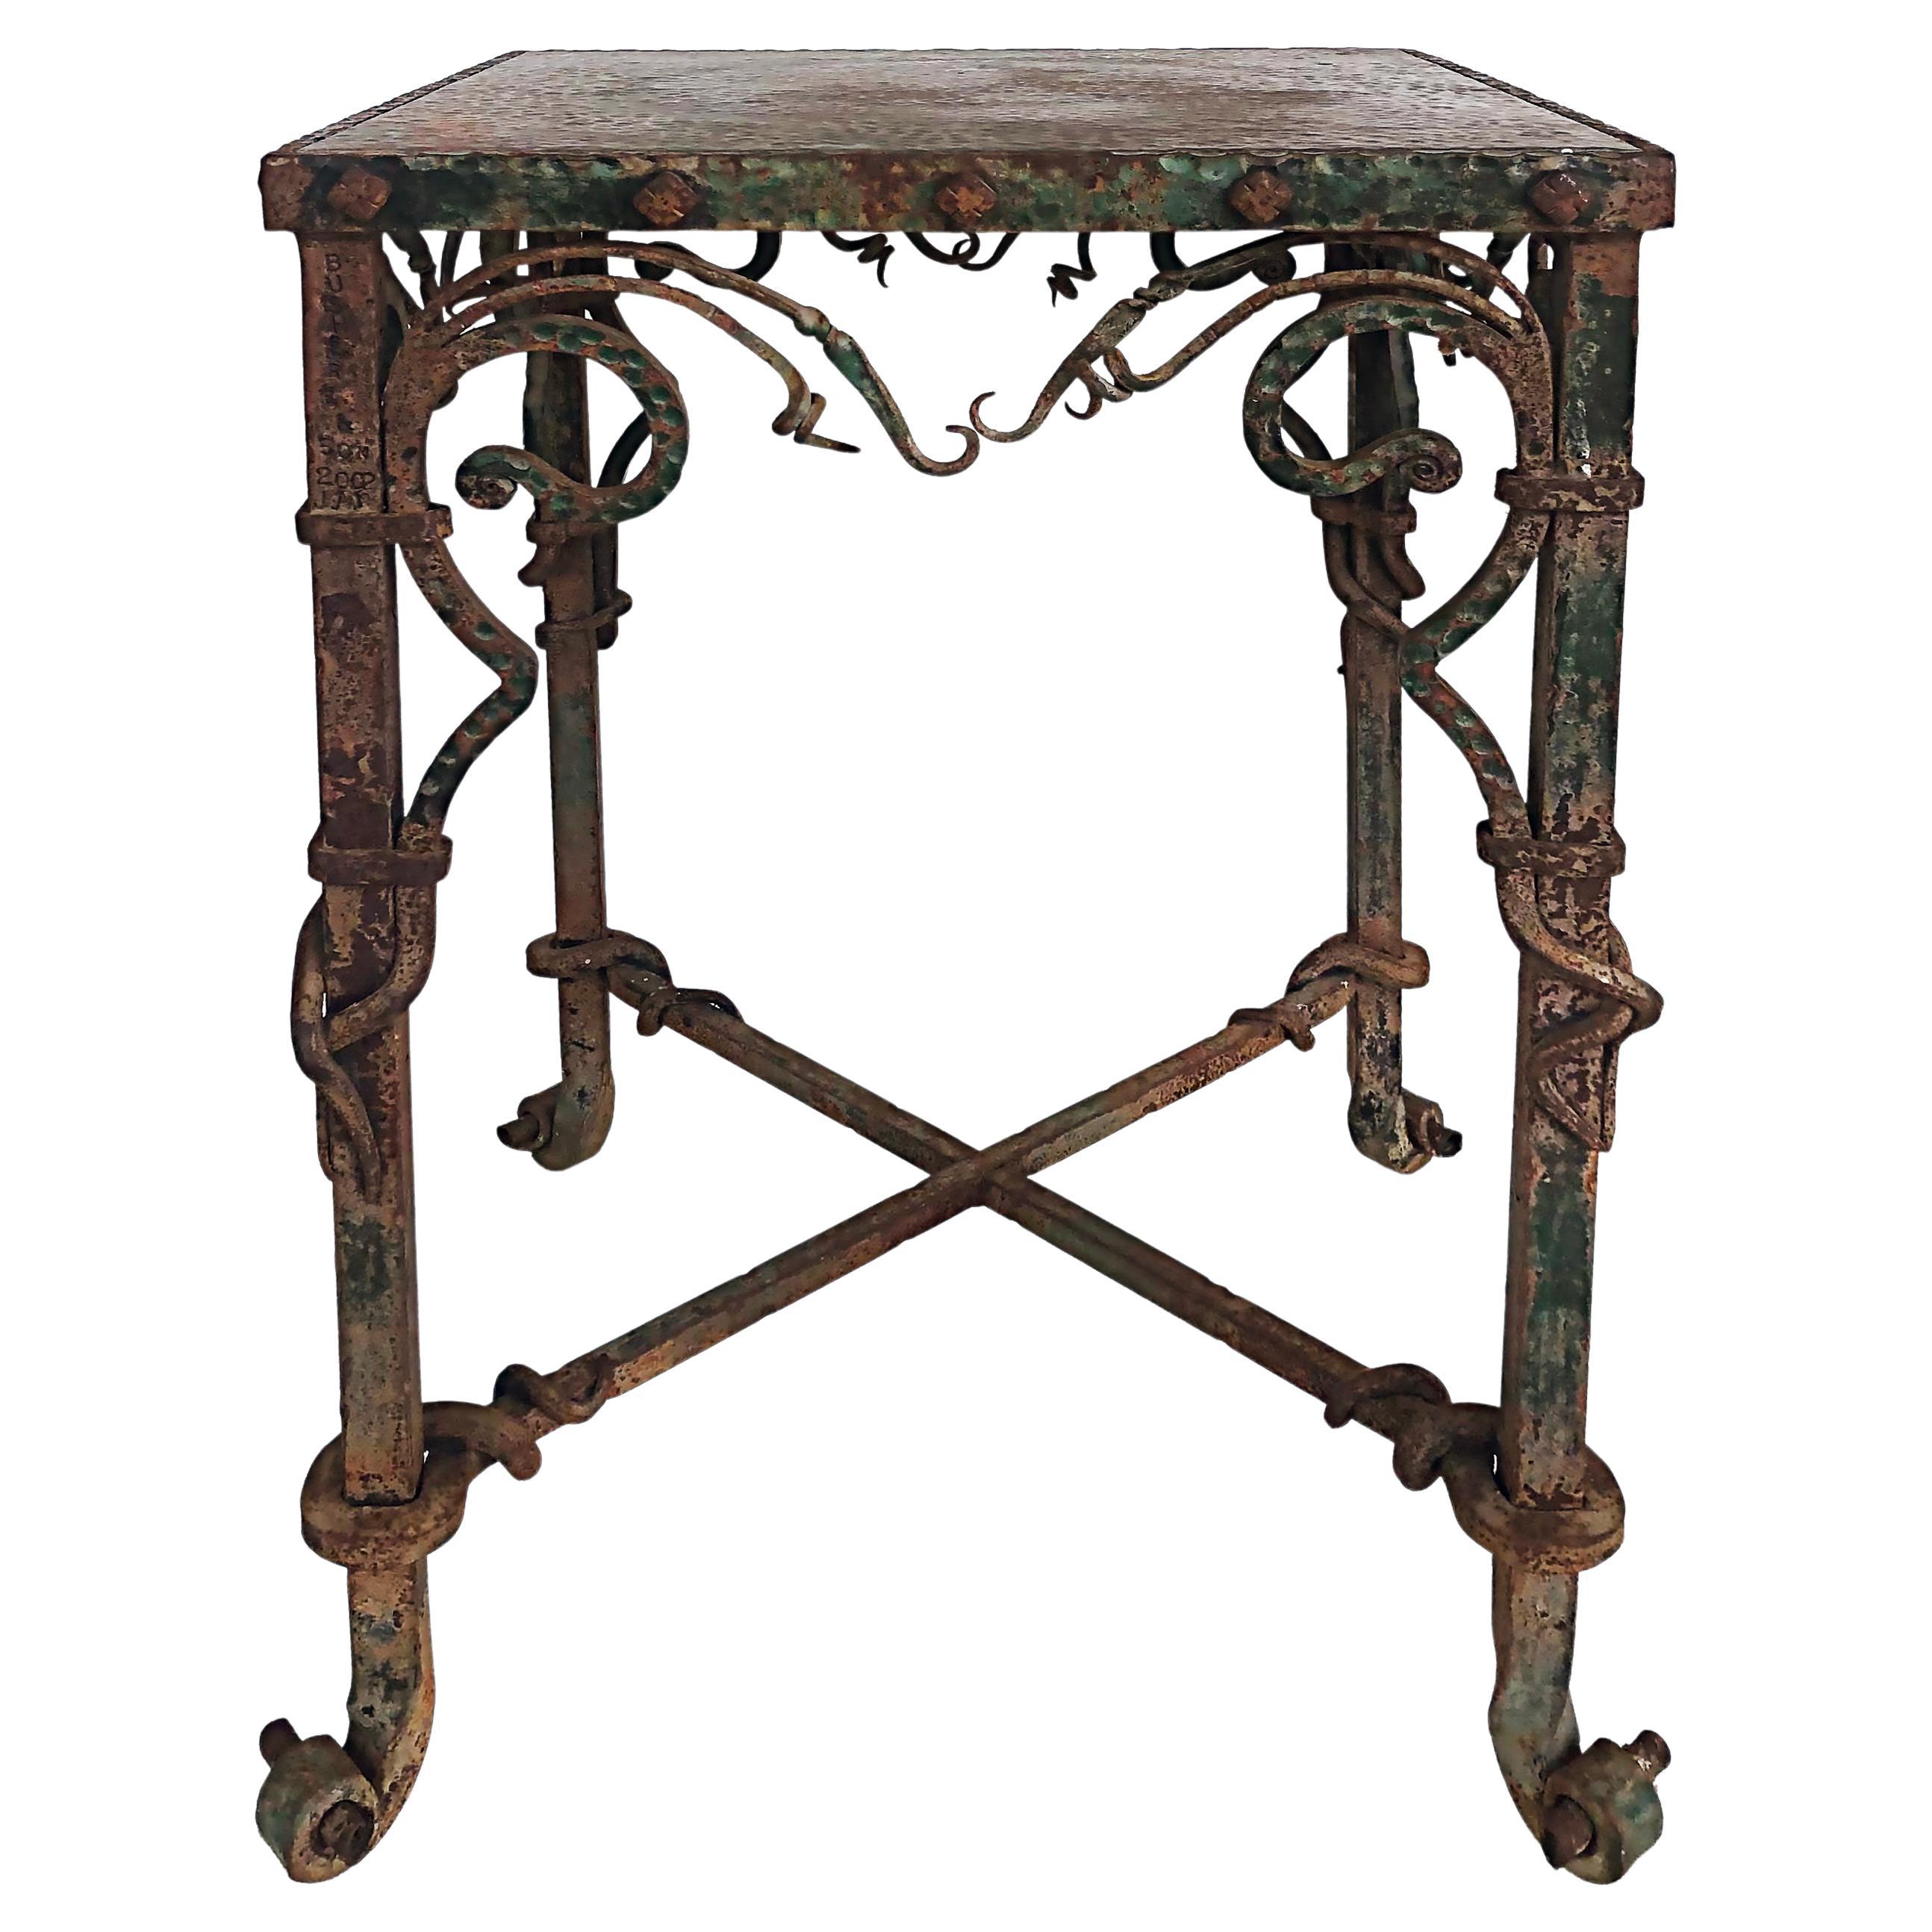 Buschere & Son Wrought Iron Hammered Copper Side/Table/Plant Stand/Pedestal